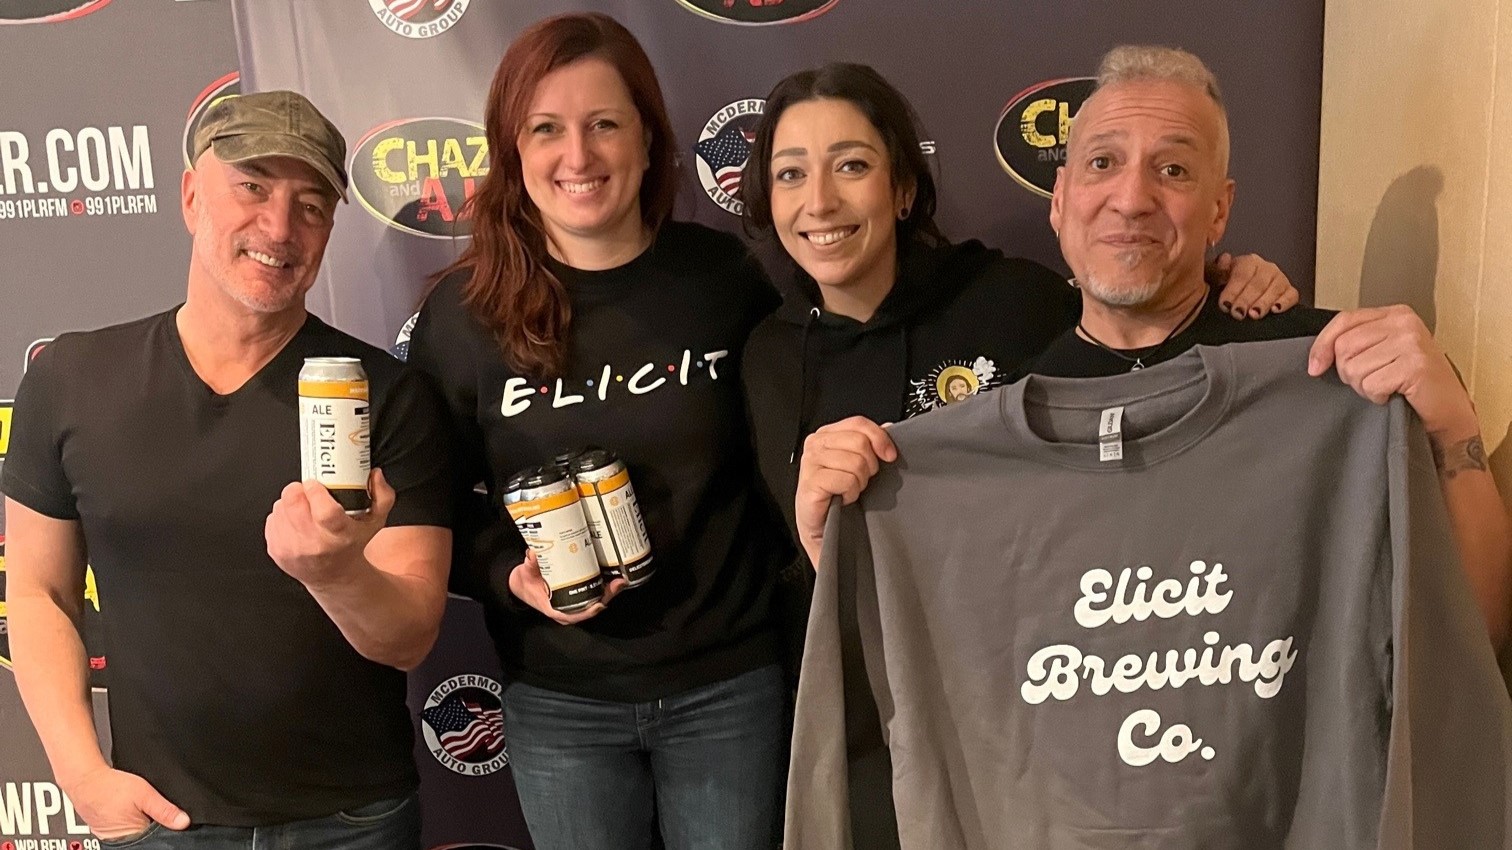 PODCAST – Tuesday, February 27: An Uncomfortable Place For A Battery; Emily From Elicit Brewing Co.; Strange Things Found In Vegas Hotel Rooms